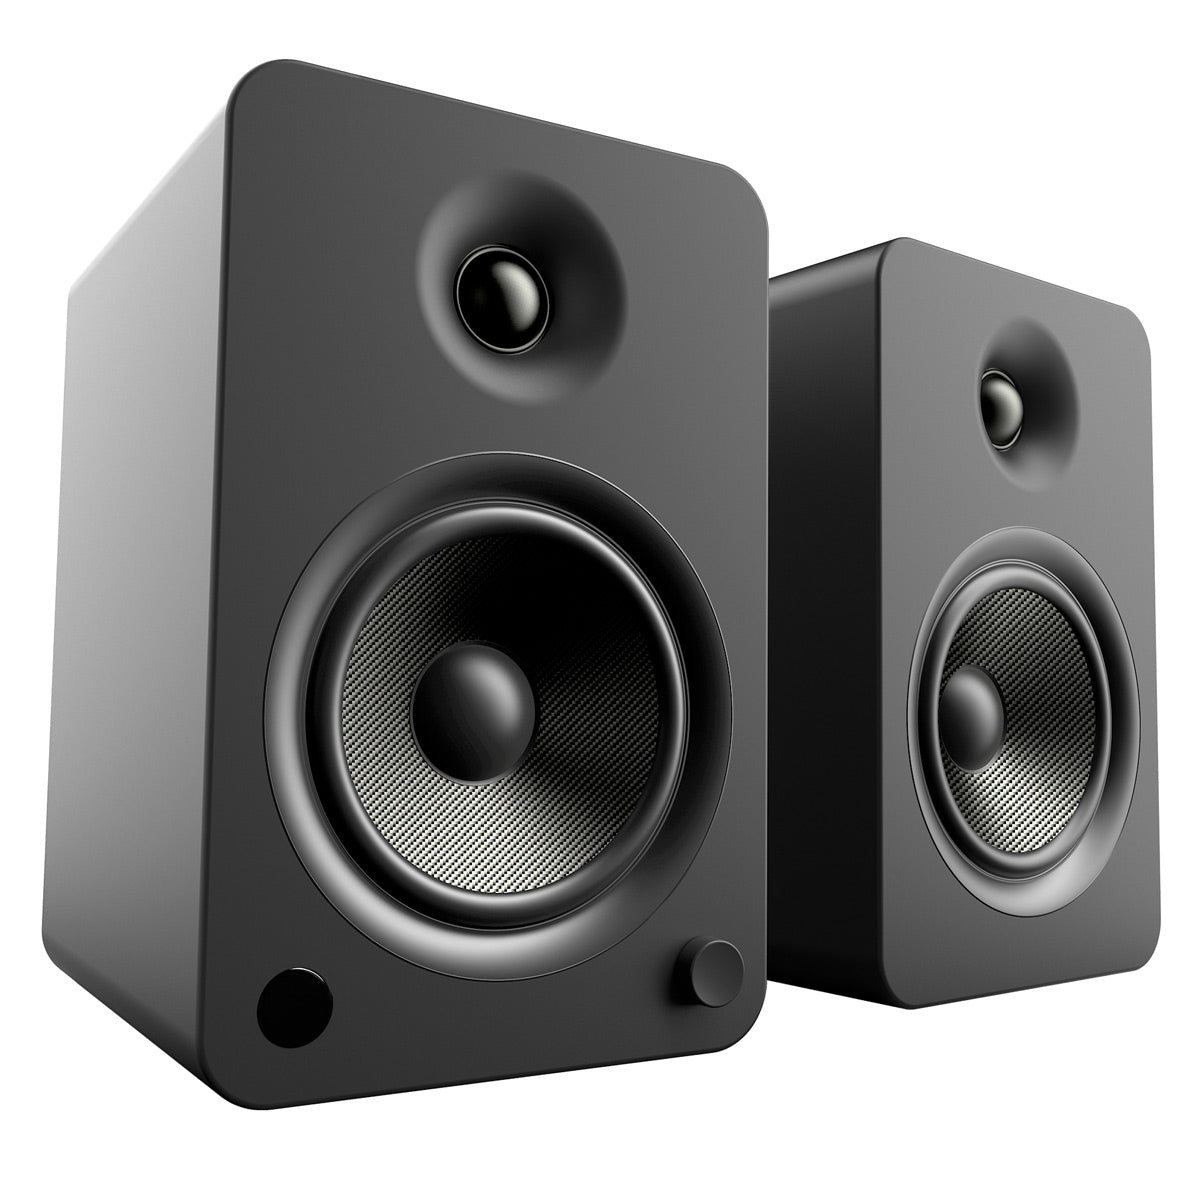 These Beautiful Bookshelf Speakers Sound As Good As They Look.